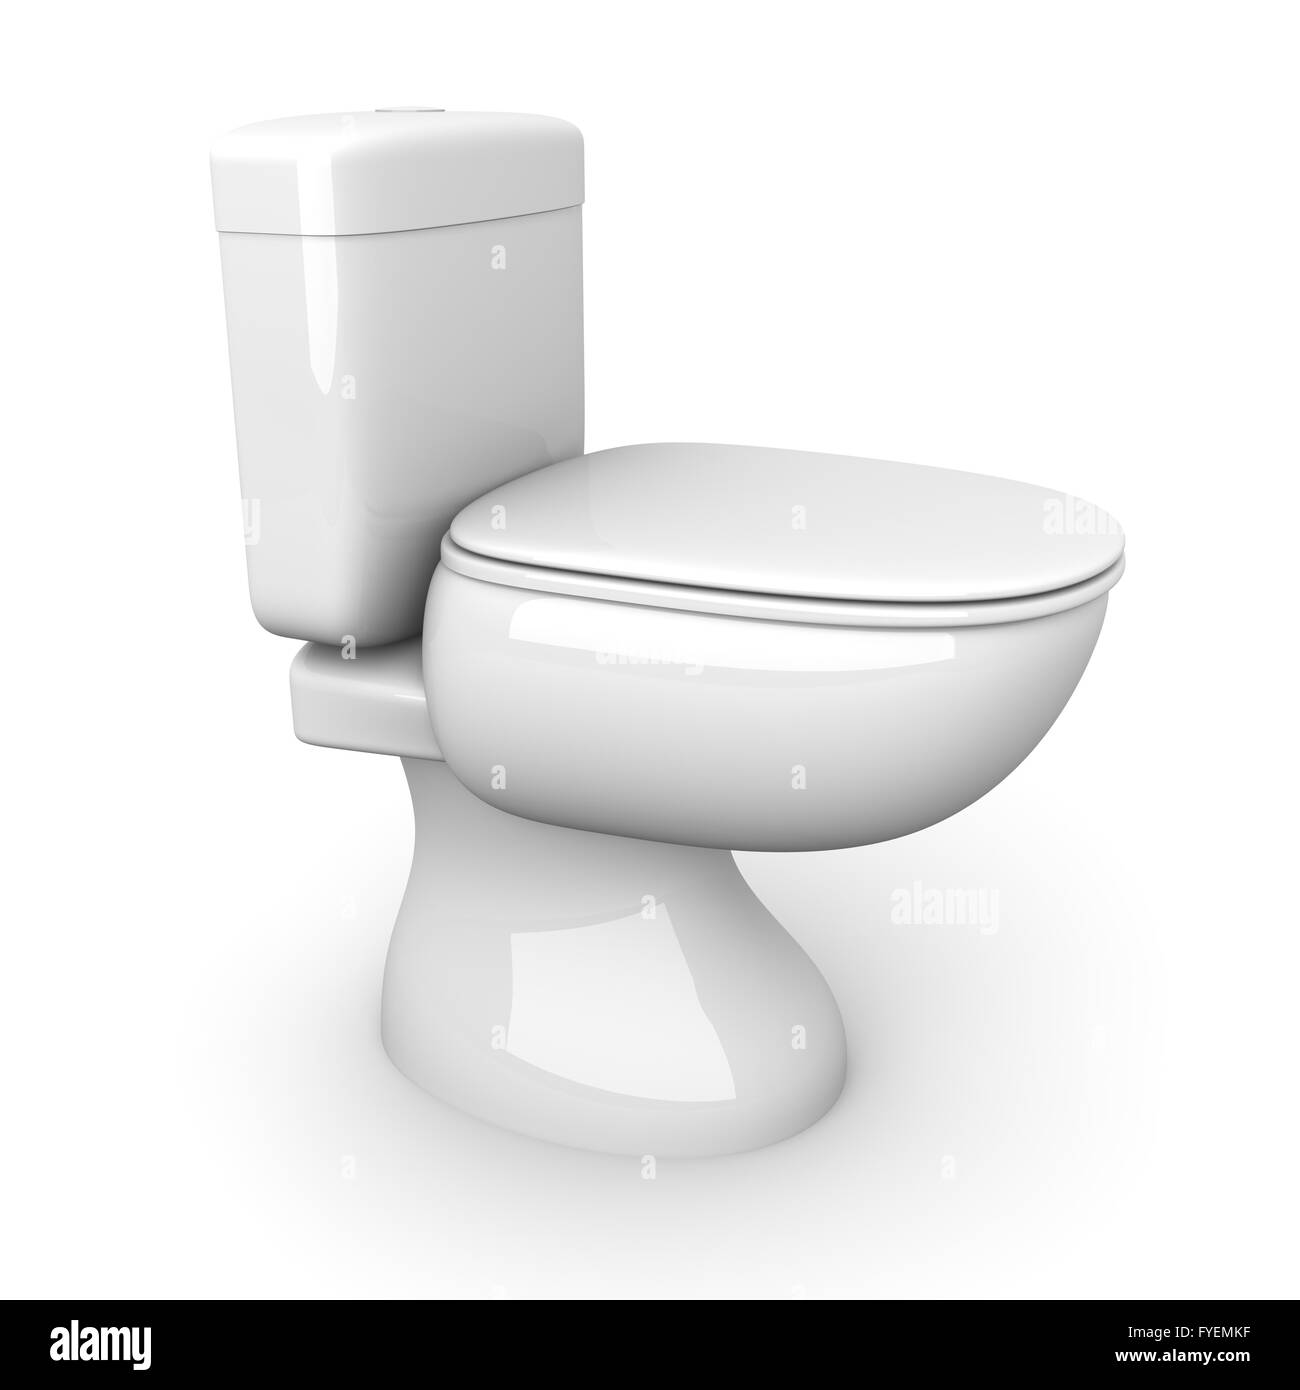 Urinal china Cut Out Stock Images & Pictures - Alamy